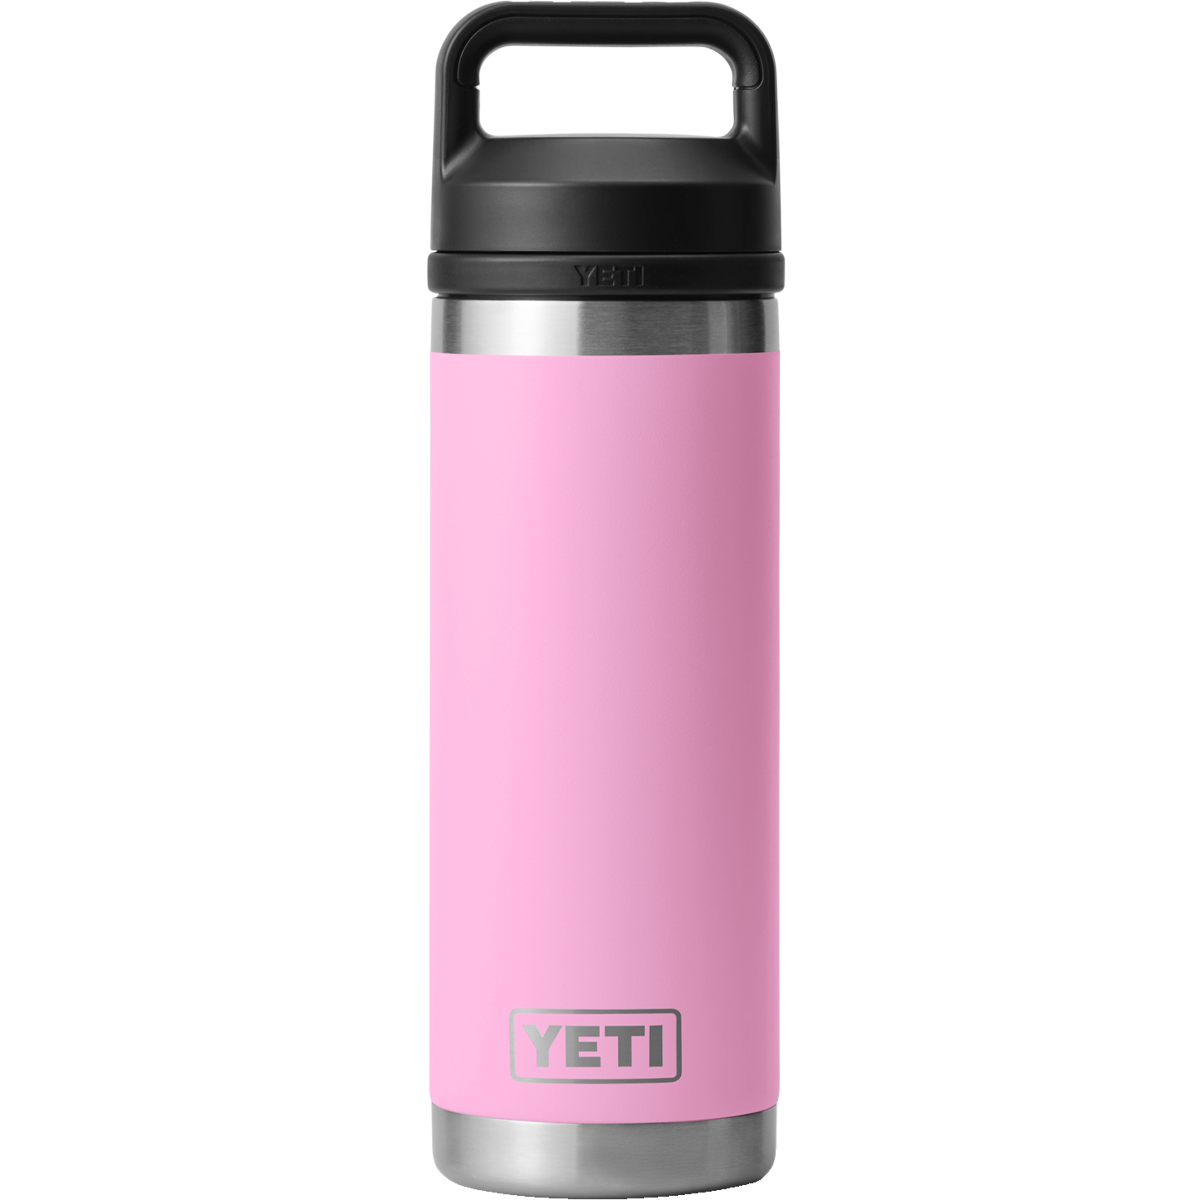 YETI Rambler 18 Stainless Steel Vacuum Insulated Bottle with Chug Cap-see  pics